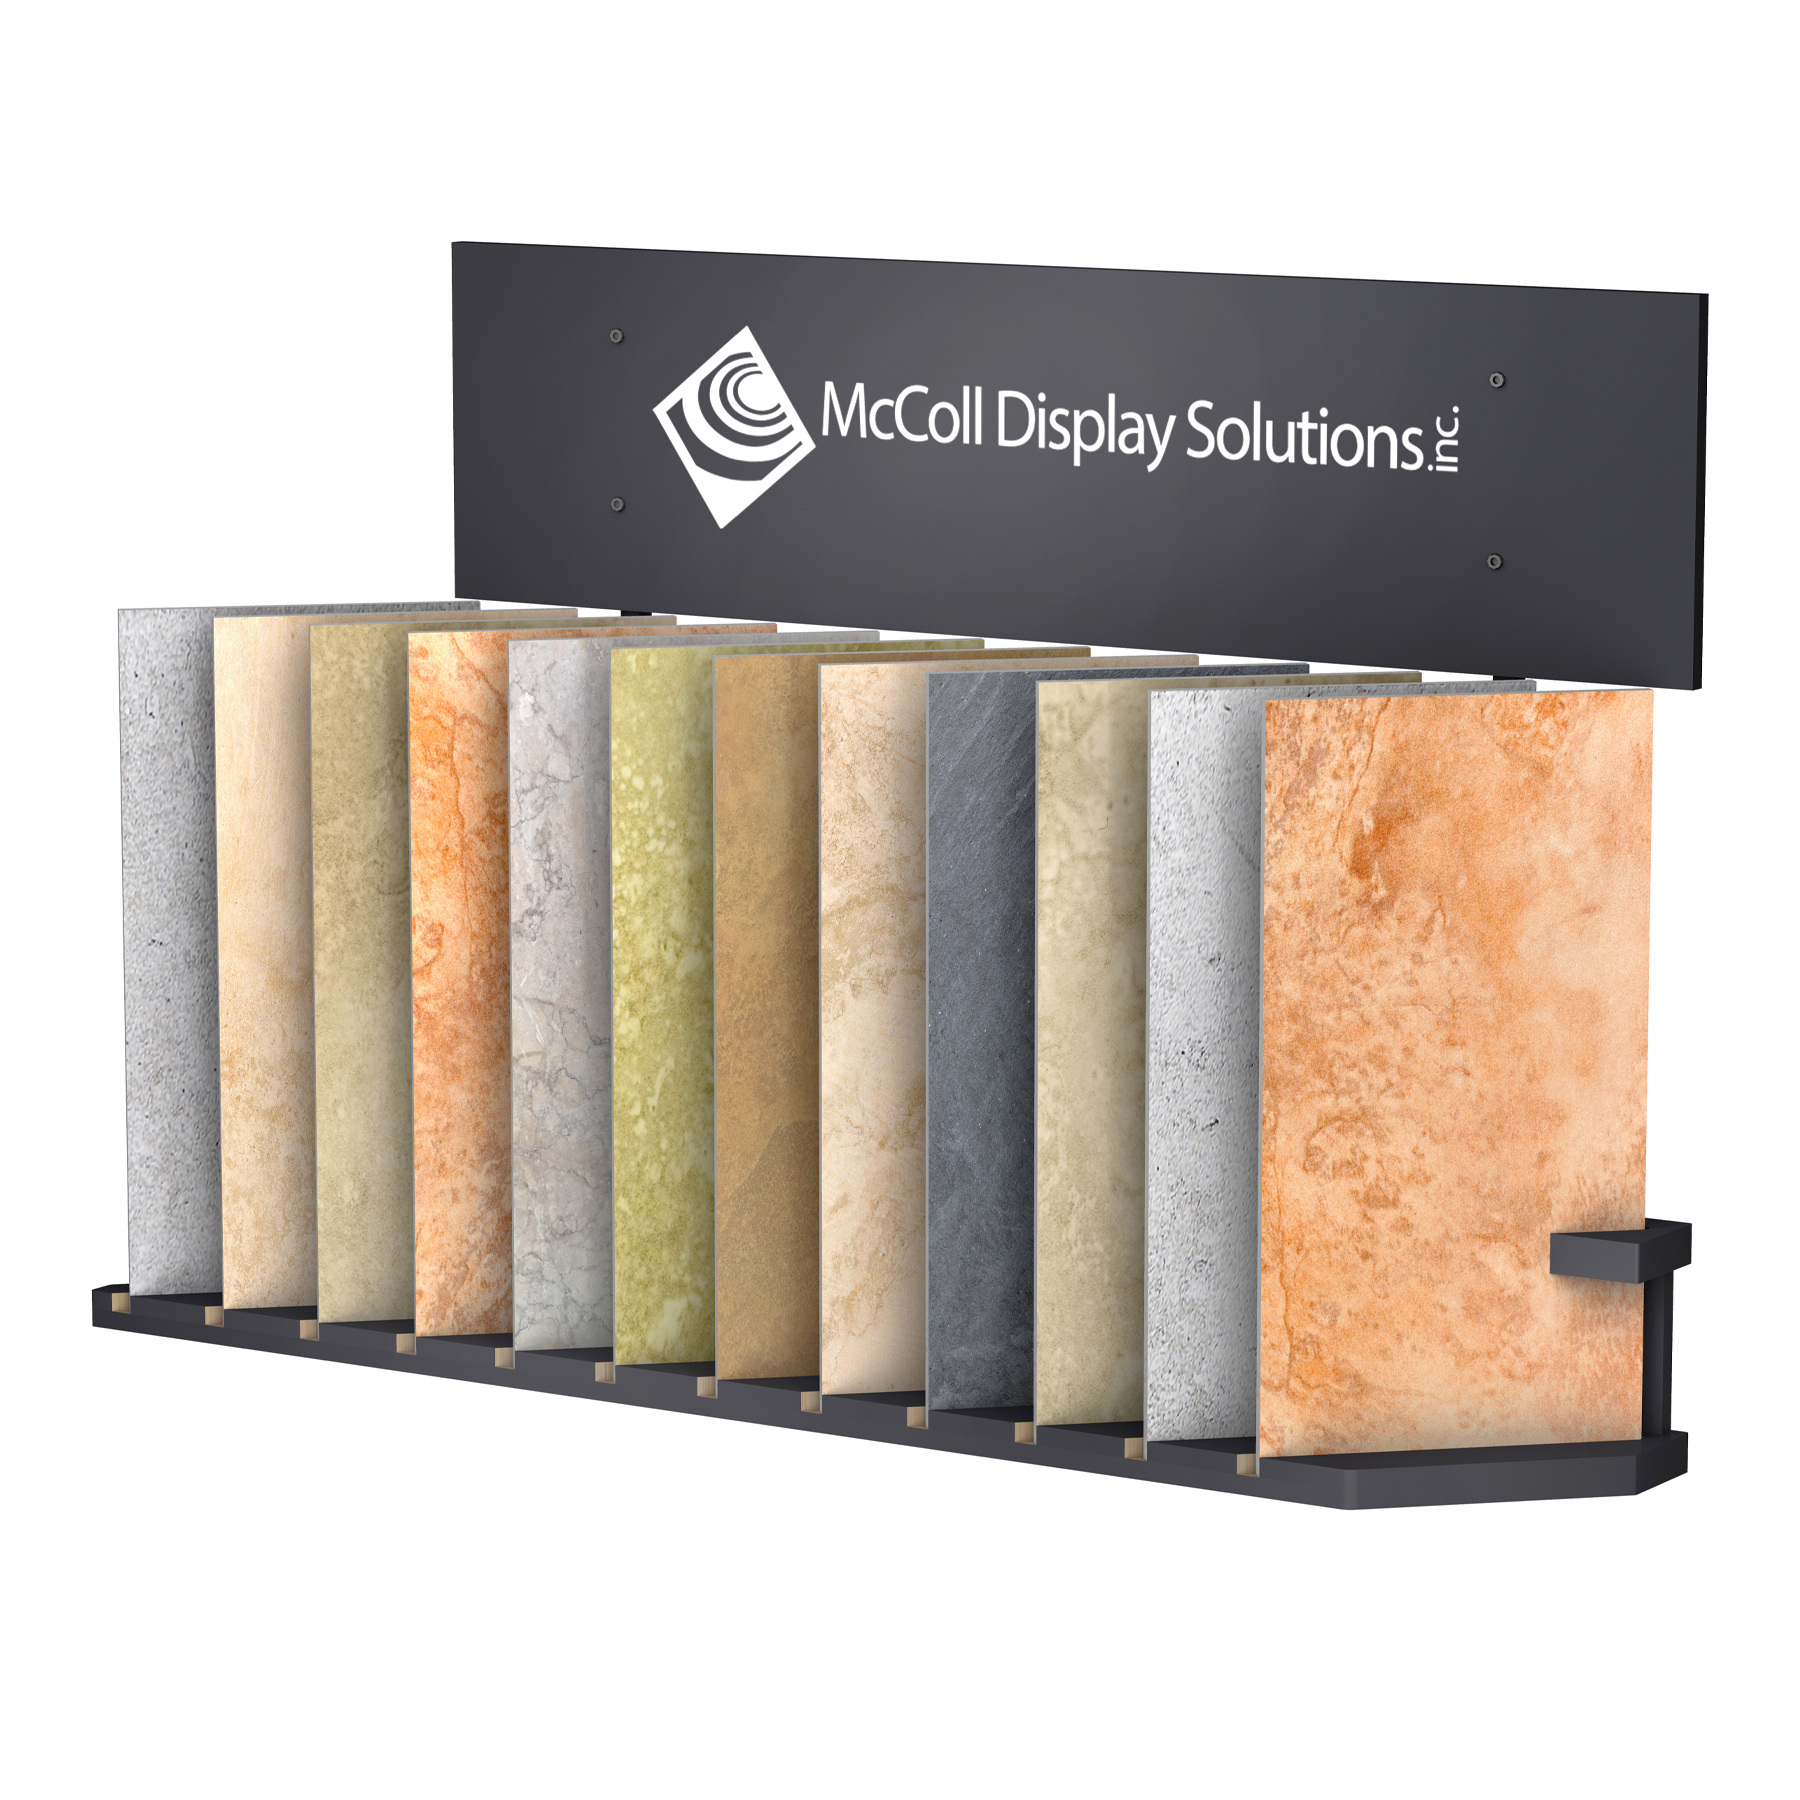 CD100 Floor Stand Display Has Slots for Your Ceramic Tiles Marble Stone Quartz Travertine Flooring Samples Offers Great Visibility and Easy Access